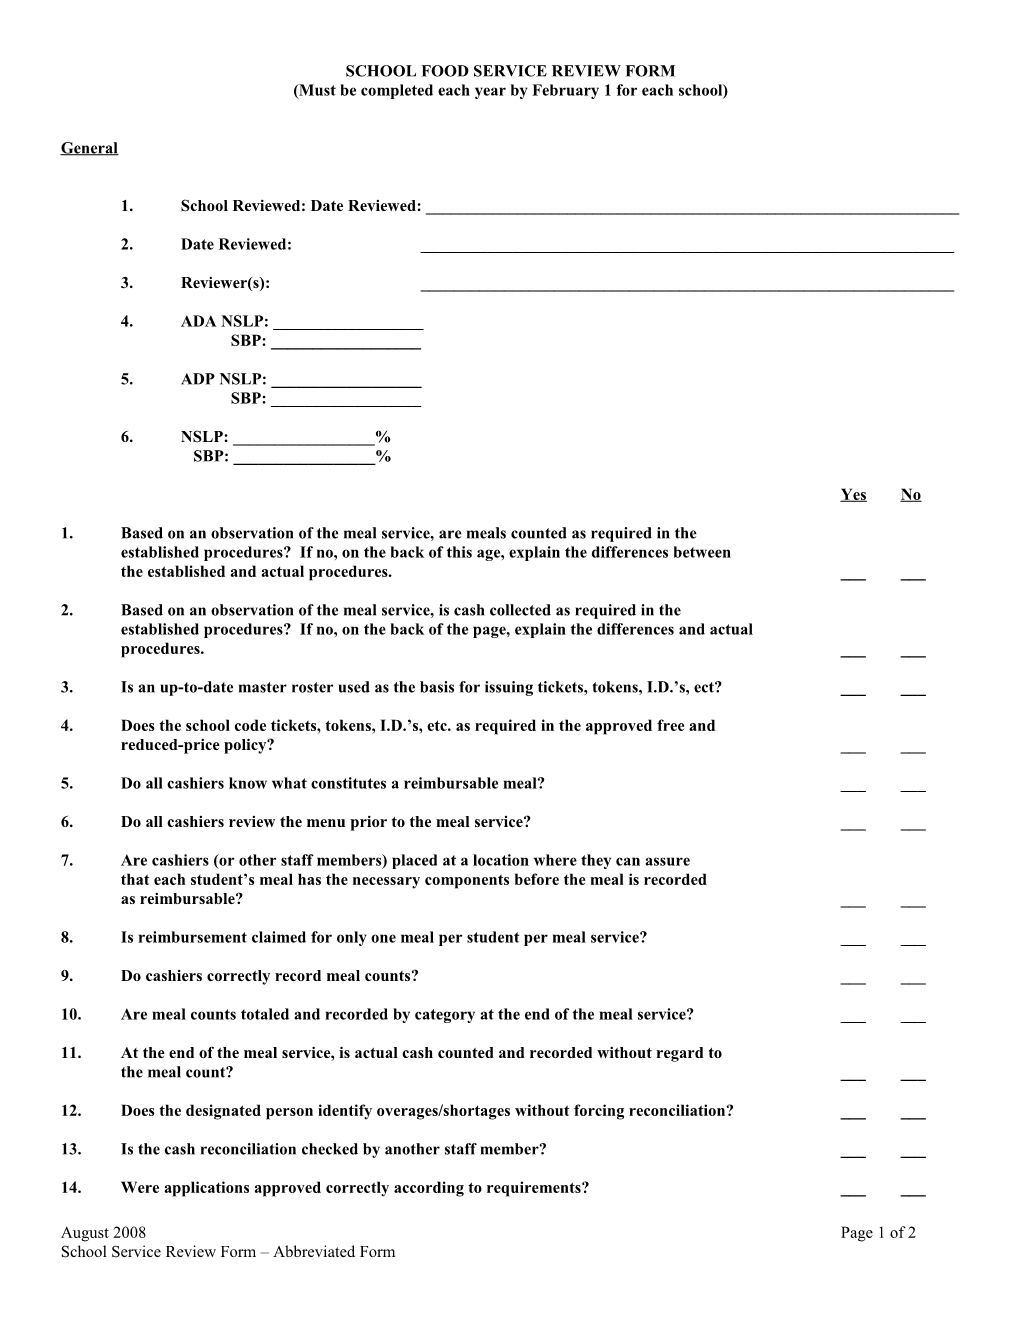 School Food Service Review Form